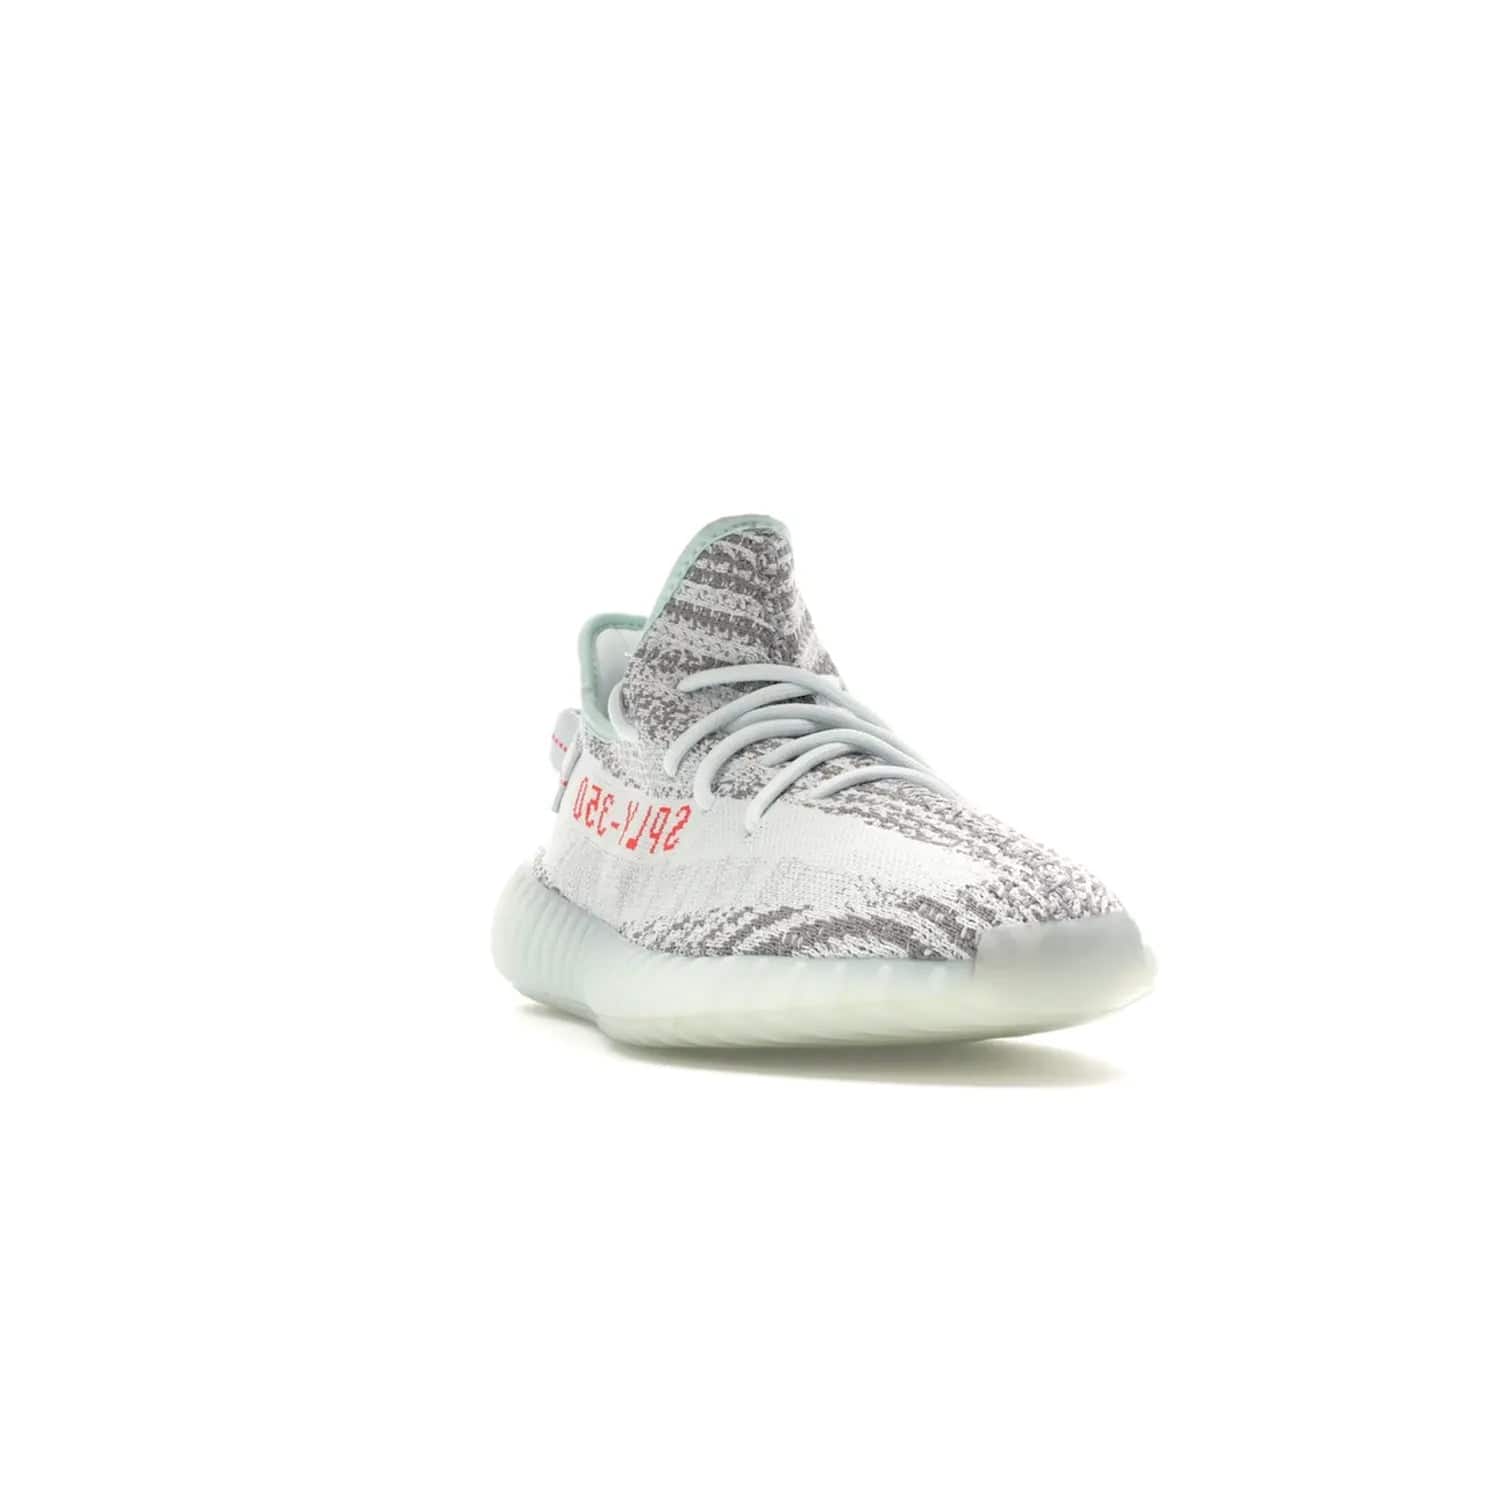 adidas Yeezy Boost 350 V2 Blue Tint - Image 8 - Only at www.BallersClubKickz.com - The adidas Yeezy Boost 350 V2 Blue Tint merges fashion and functionality with its Primeknit upper and Boost sole. Released in December 2017, this luxurious sneaker is perfect for making a stylish statement.